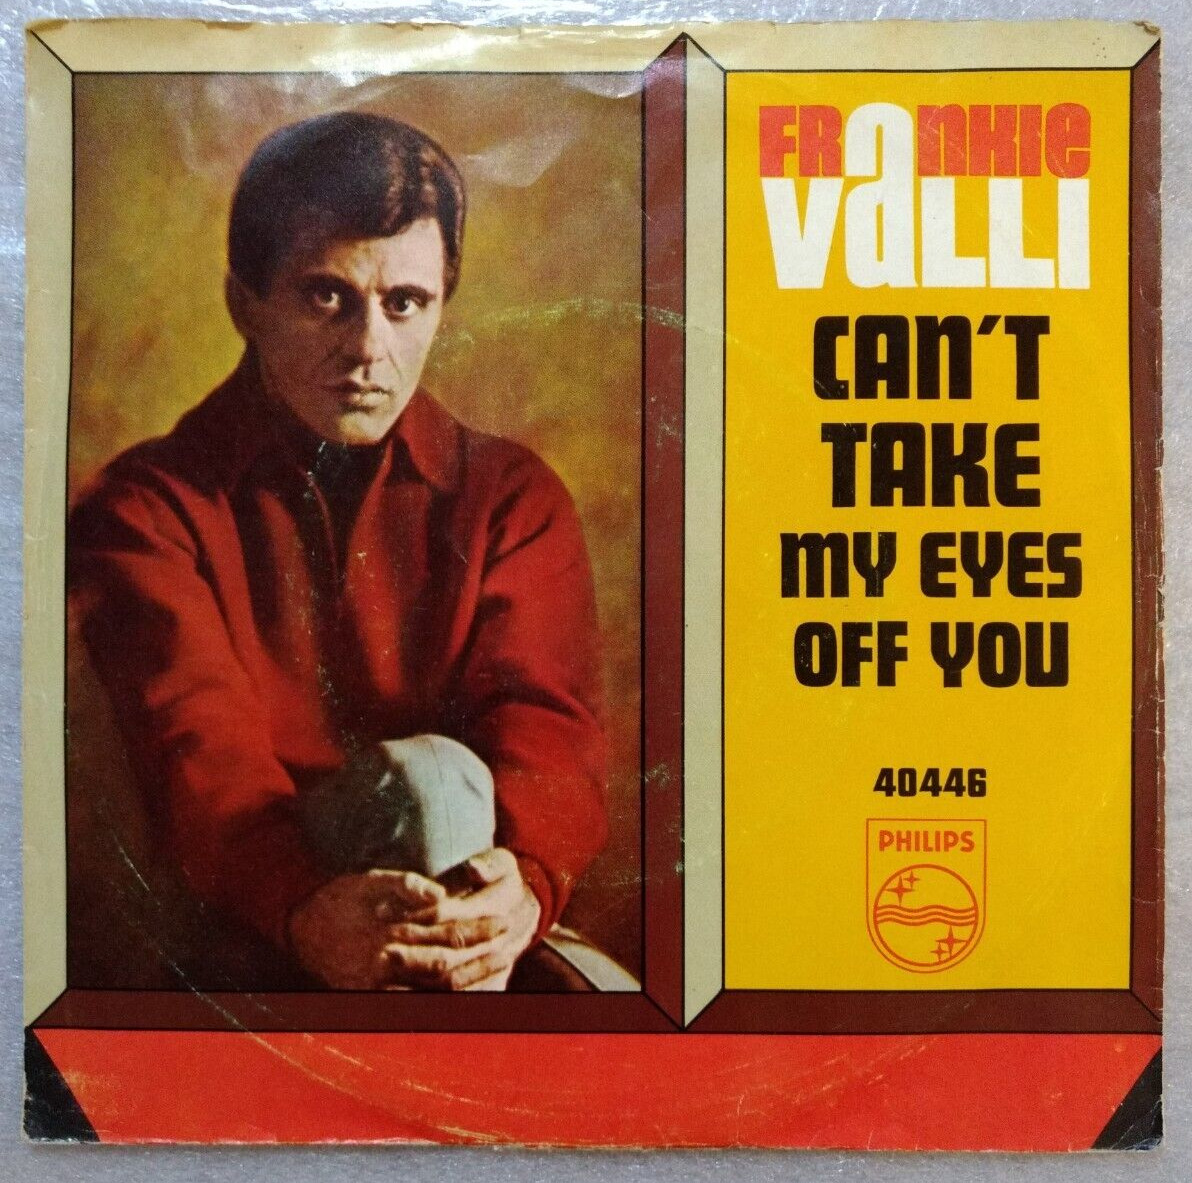 Frankie Valli Can't Take My Eyes Off You Phillips 40466 1967 VG+ 45 RPM PROMO